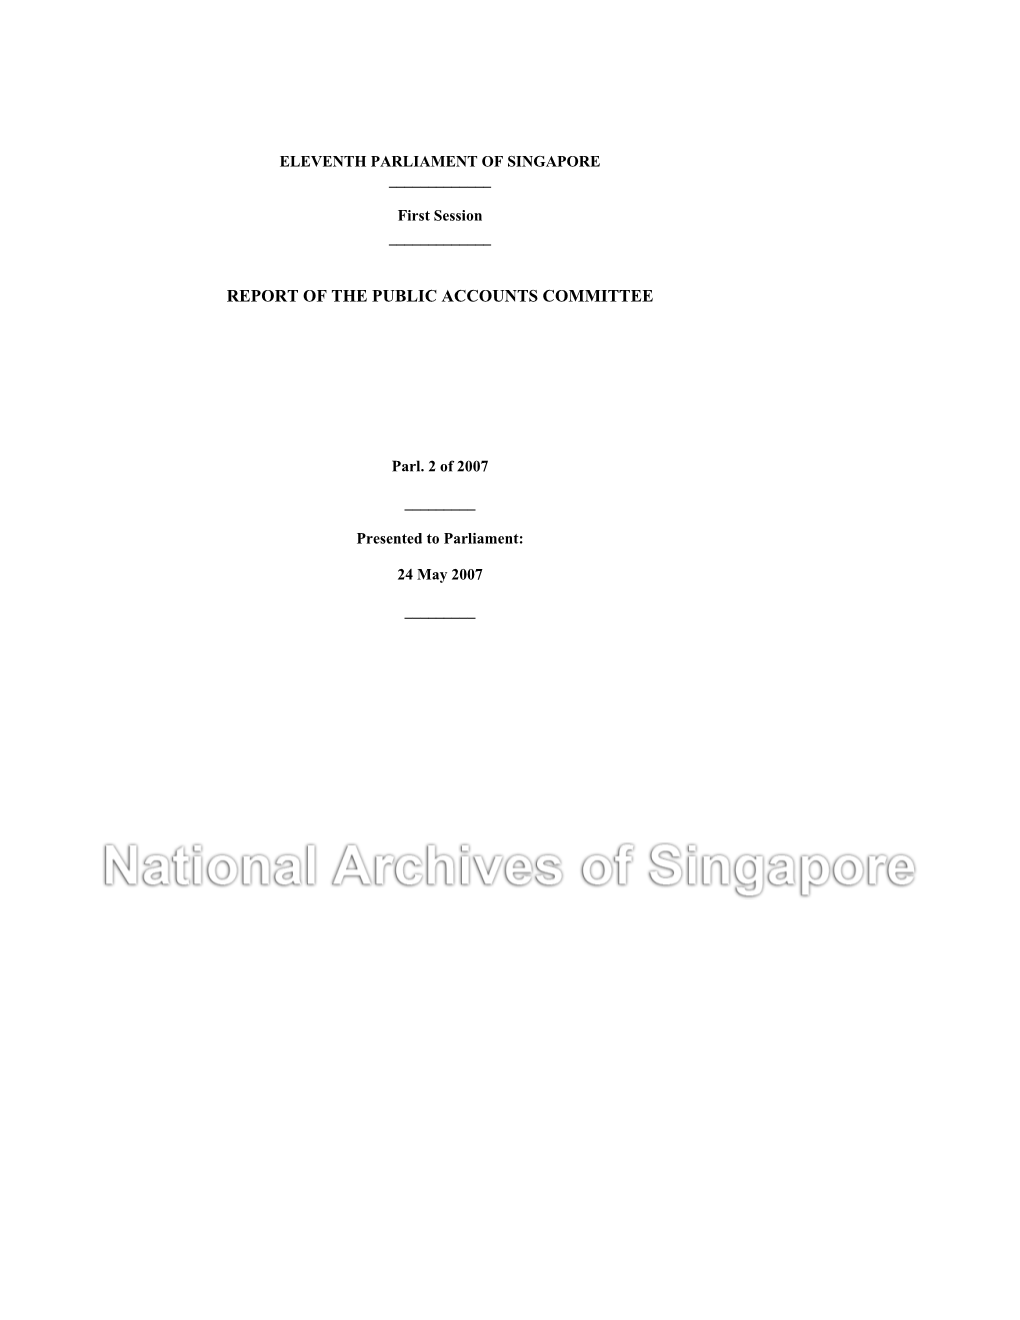 Report of the Public Accounts Committee